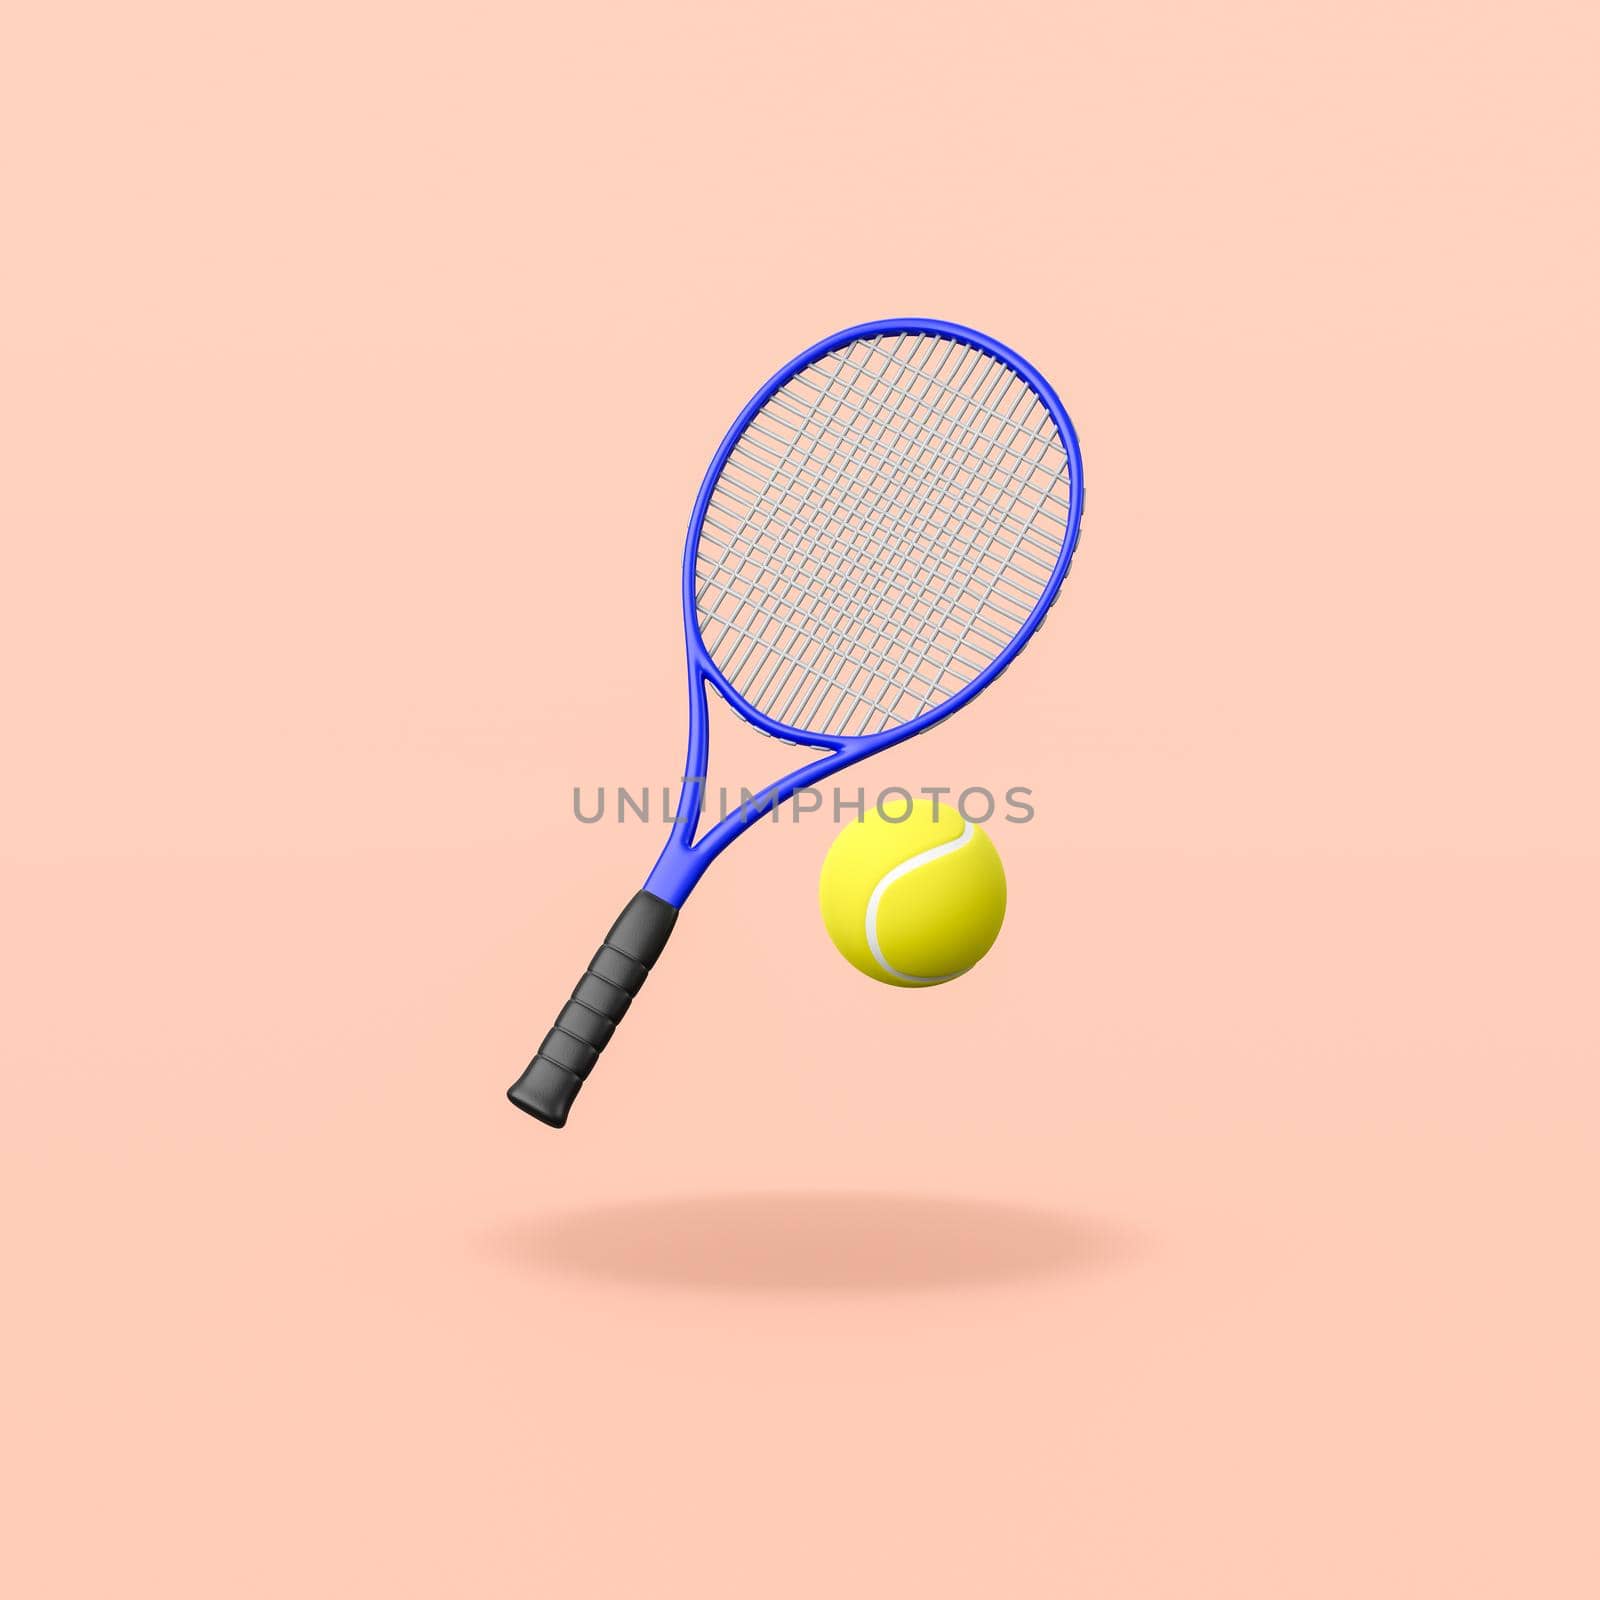 Tennis Racket and Ball on Orange Background by make